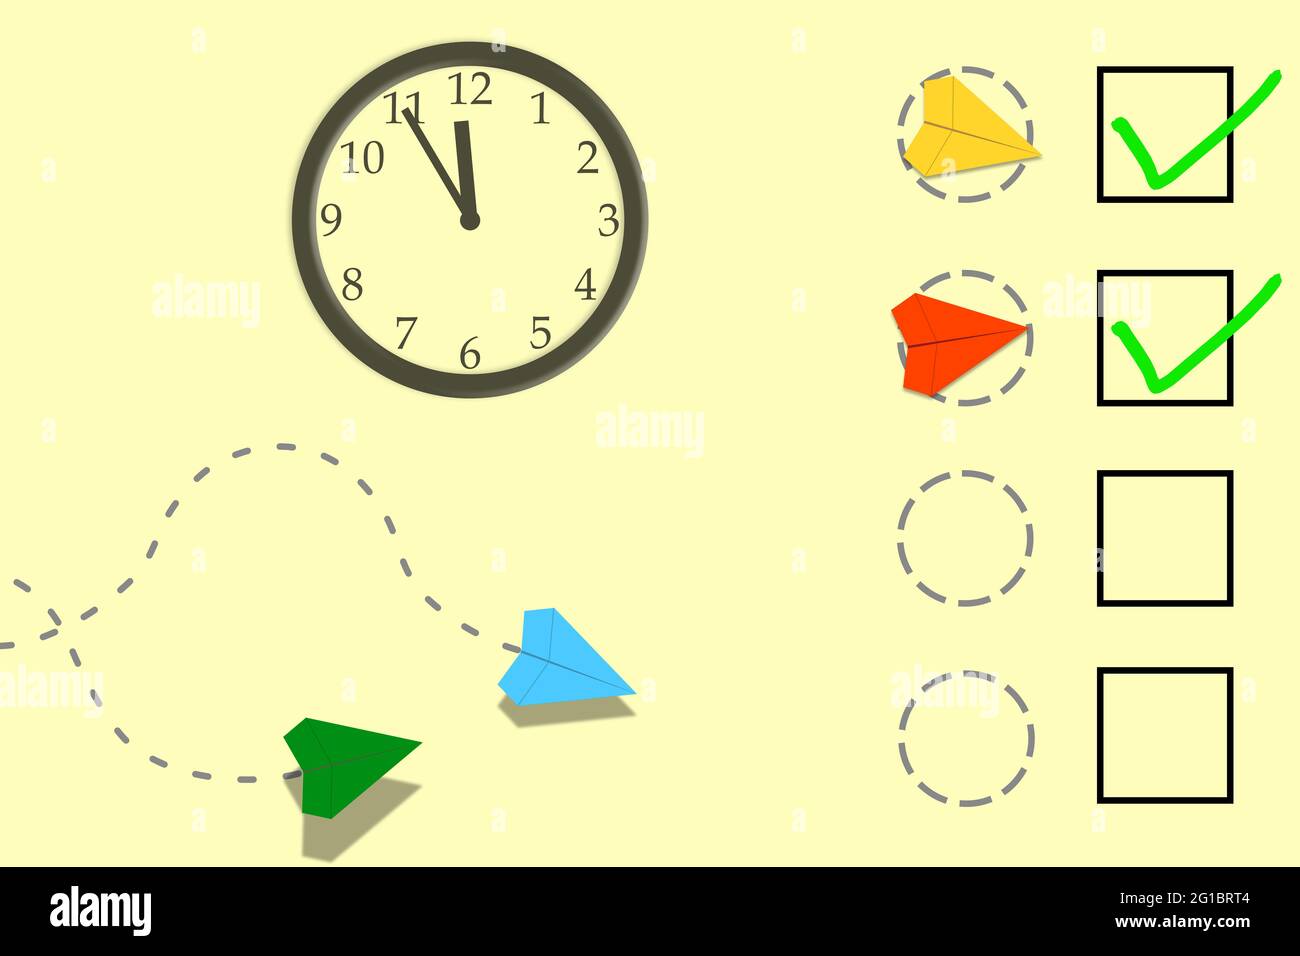 Paper planes flying to destination, with checkboxes marking completion, and clock showing 5 minutes to 12. Picture symbolizes time constraint. Stock Photo